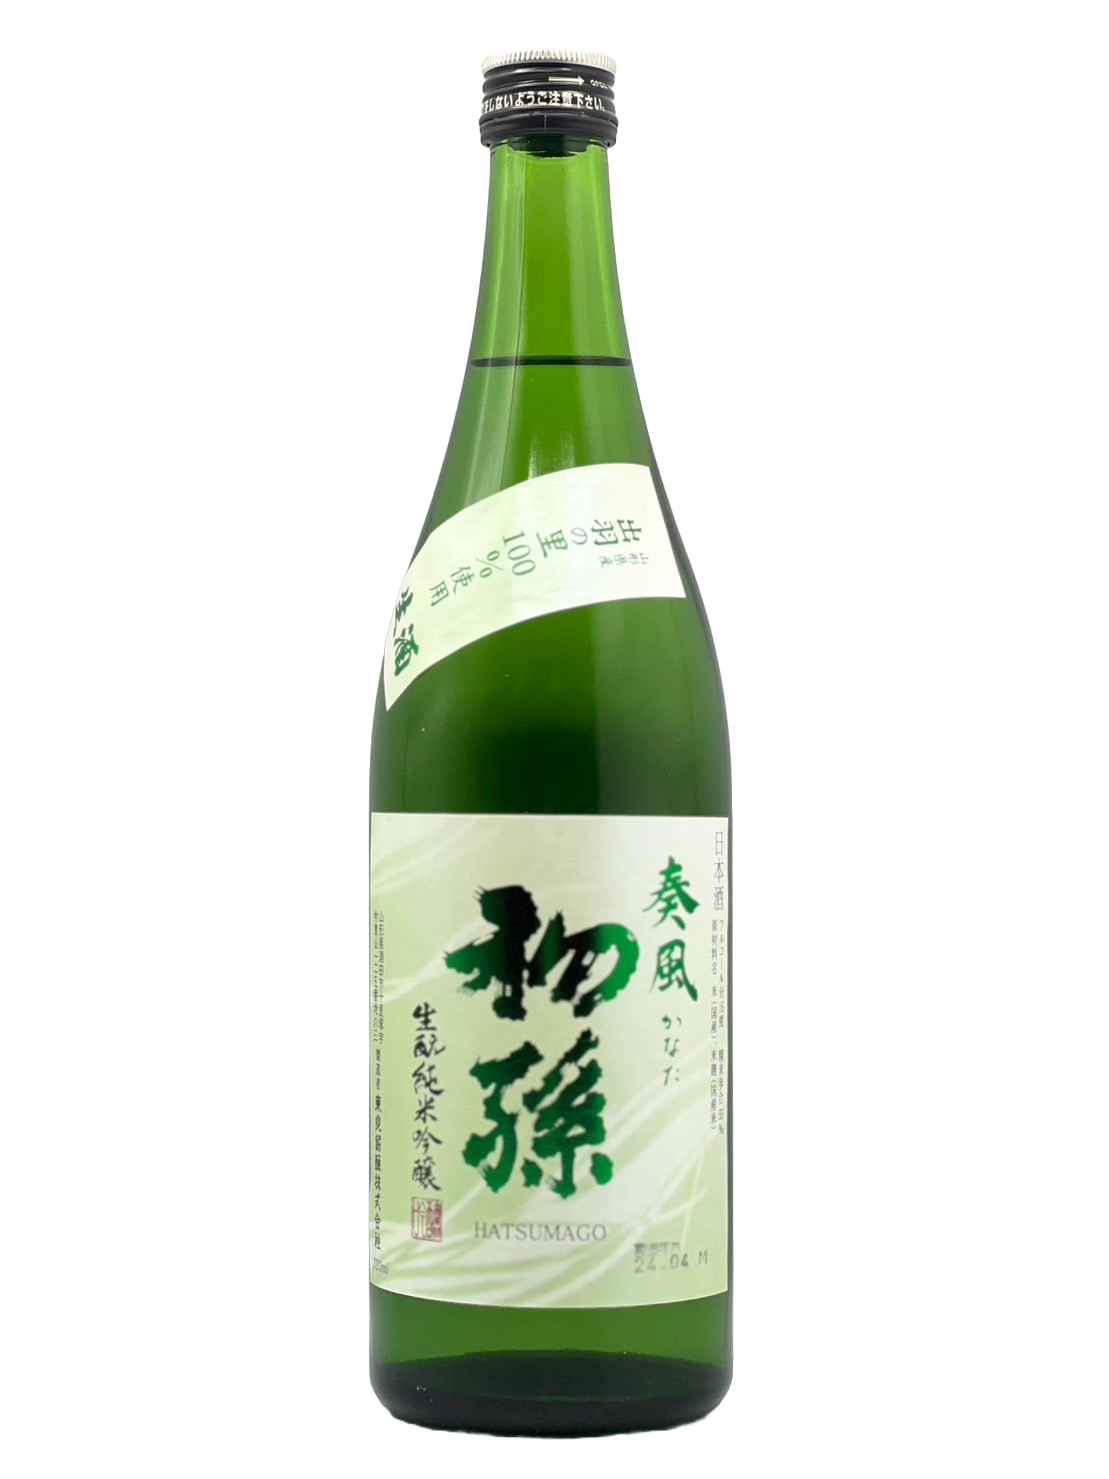 [Eligible for refrigerated delivery] Hatsumago Kanata, pure rice ginjo sake